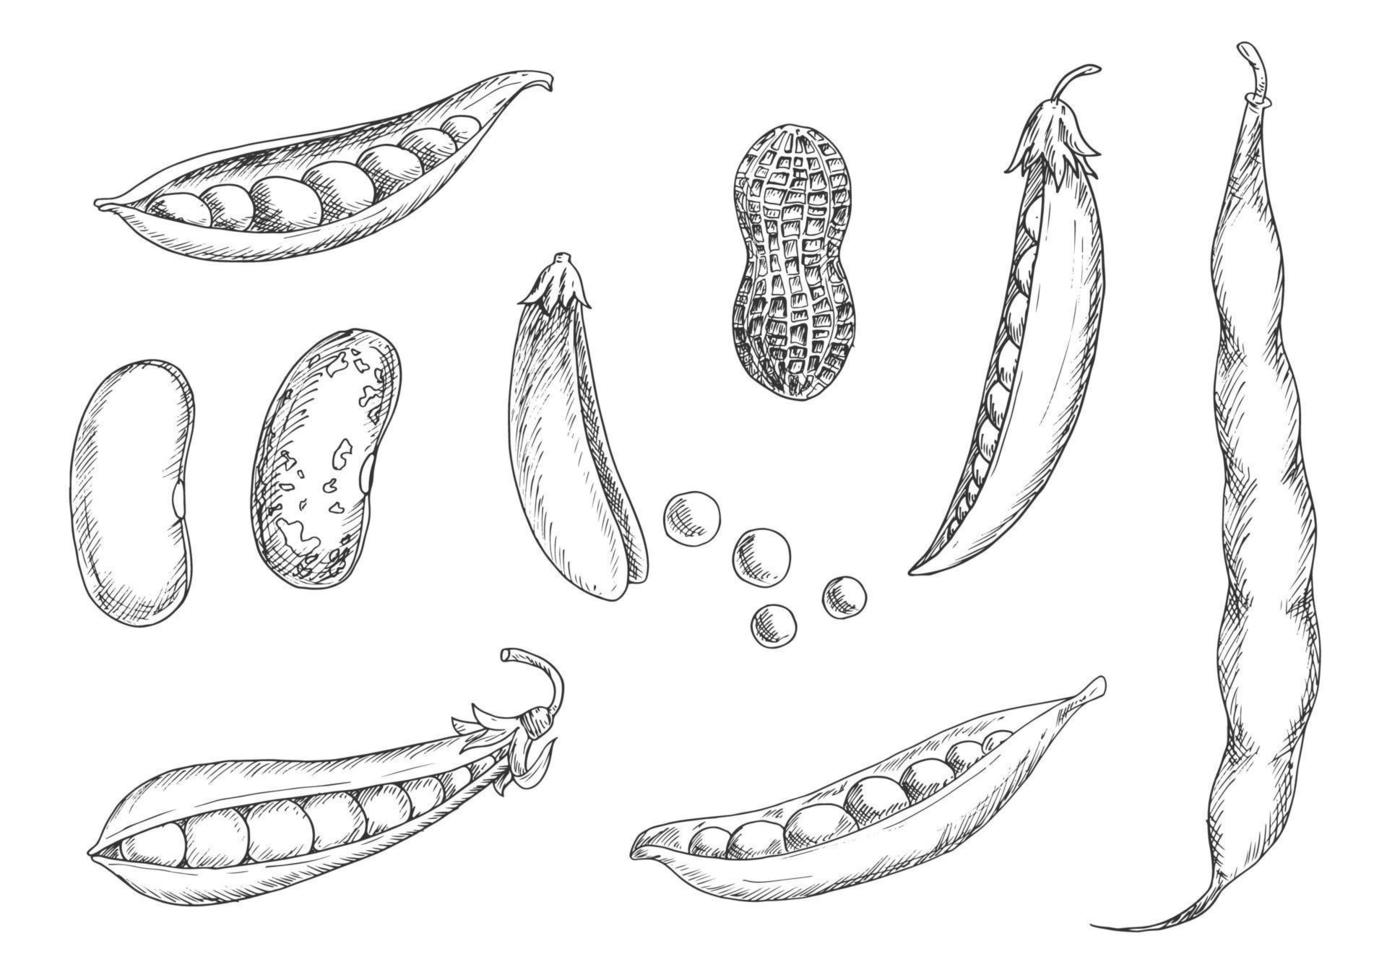 Sketches of peanut, pea pods and beans vector